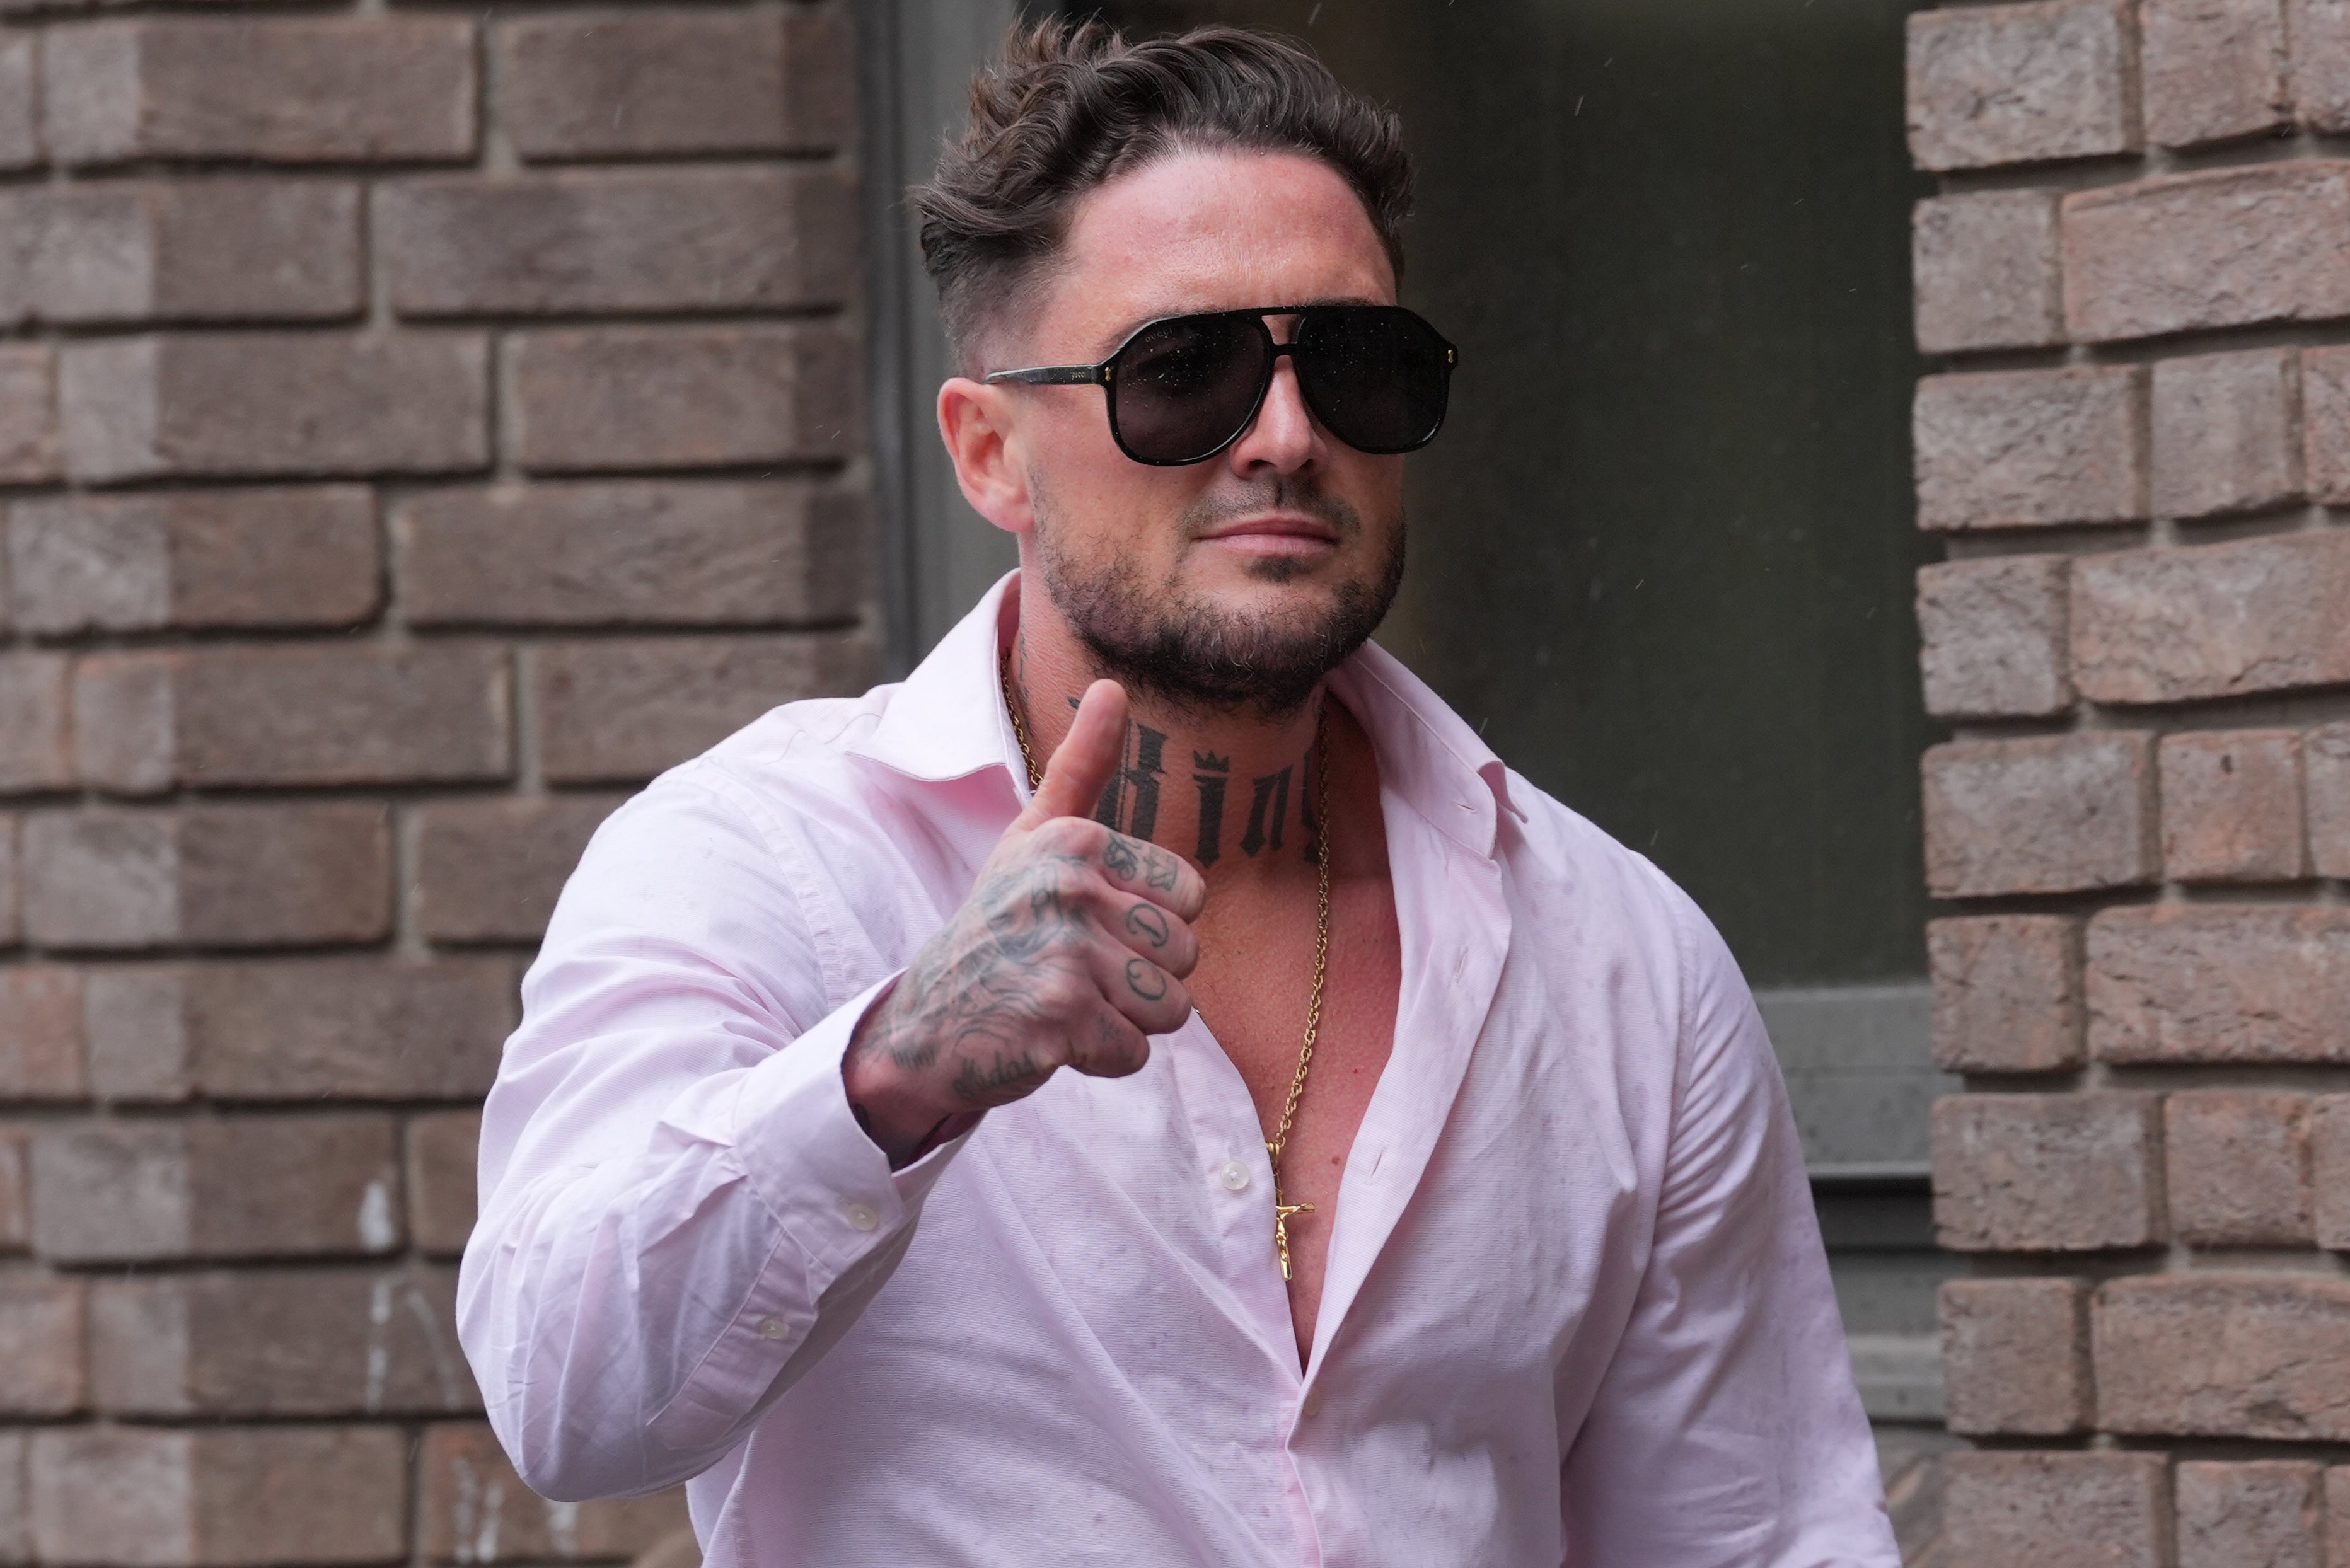 Stephen Bear arrives at Chelmsford Crown Court, Essex, for a confiscation hearing following his conviction for voyeurism